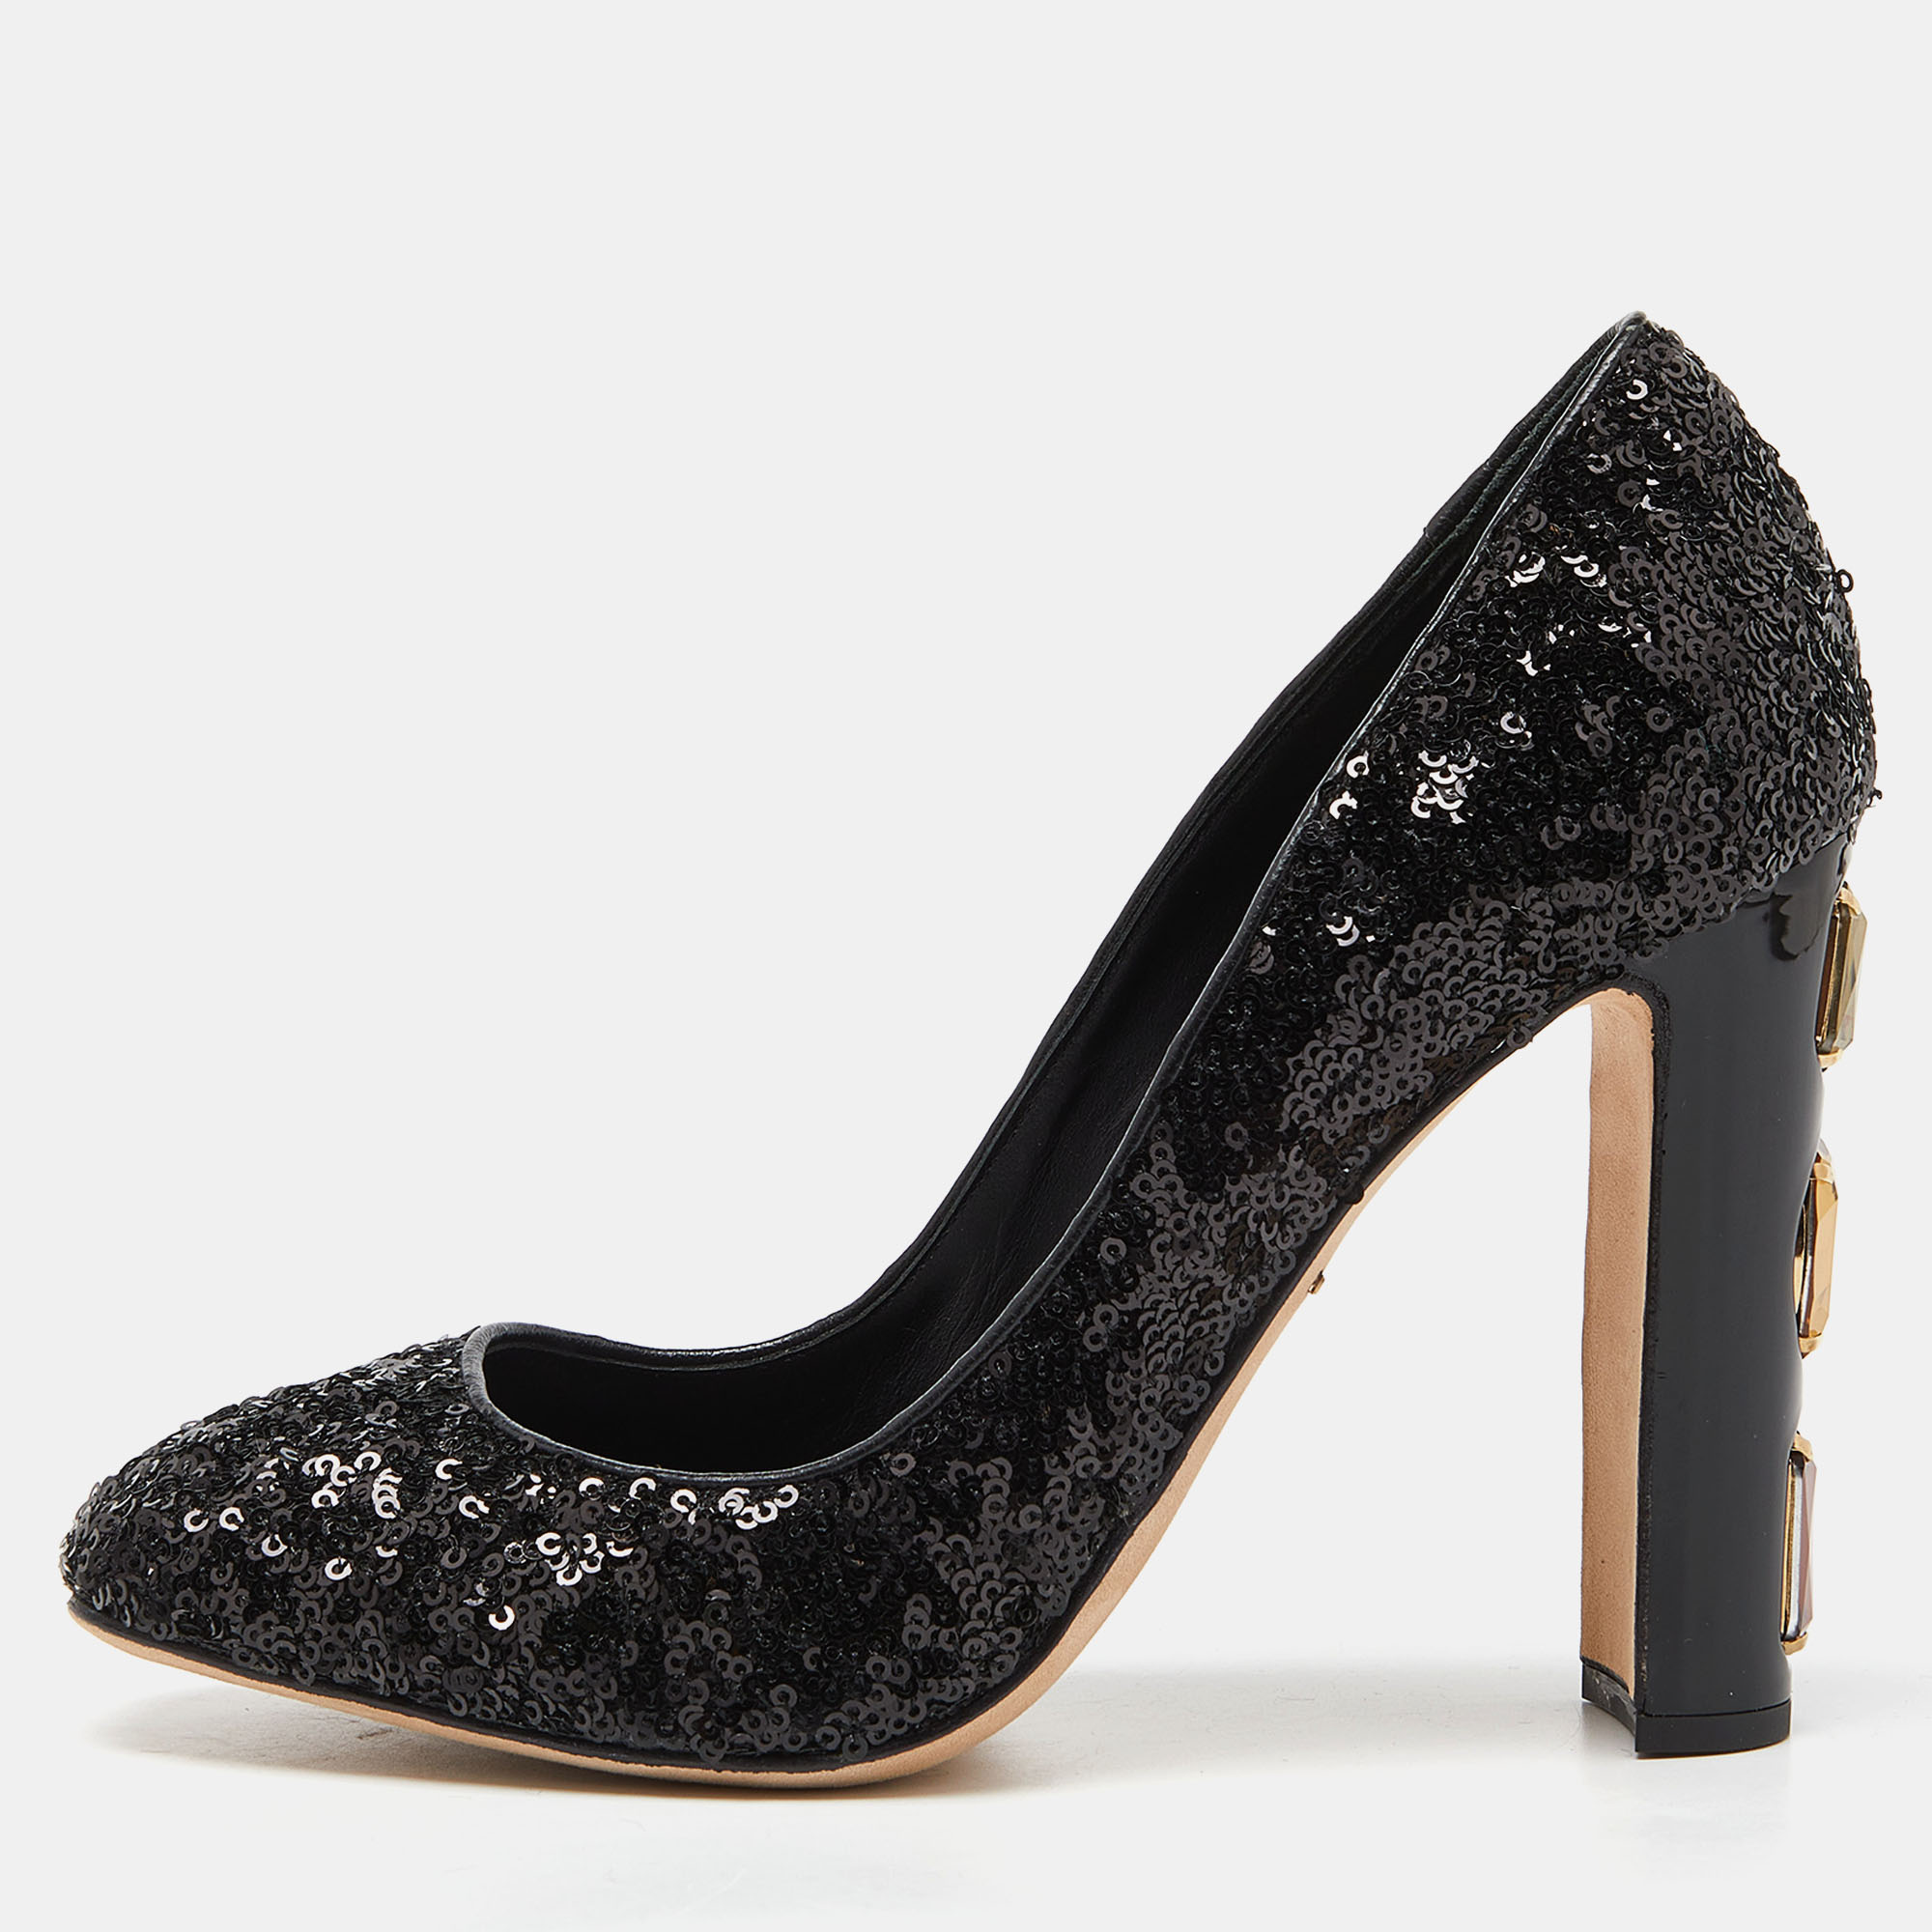 Dolce & gabbana black sequins and leather block heel pumps size 37.5